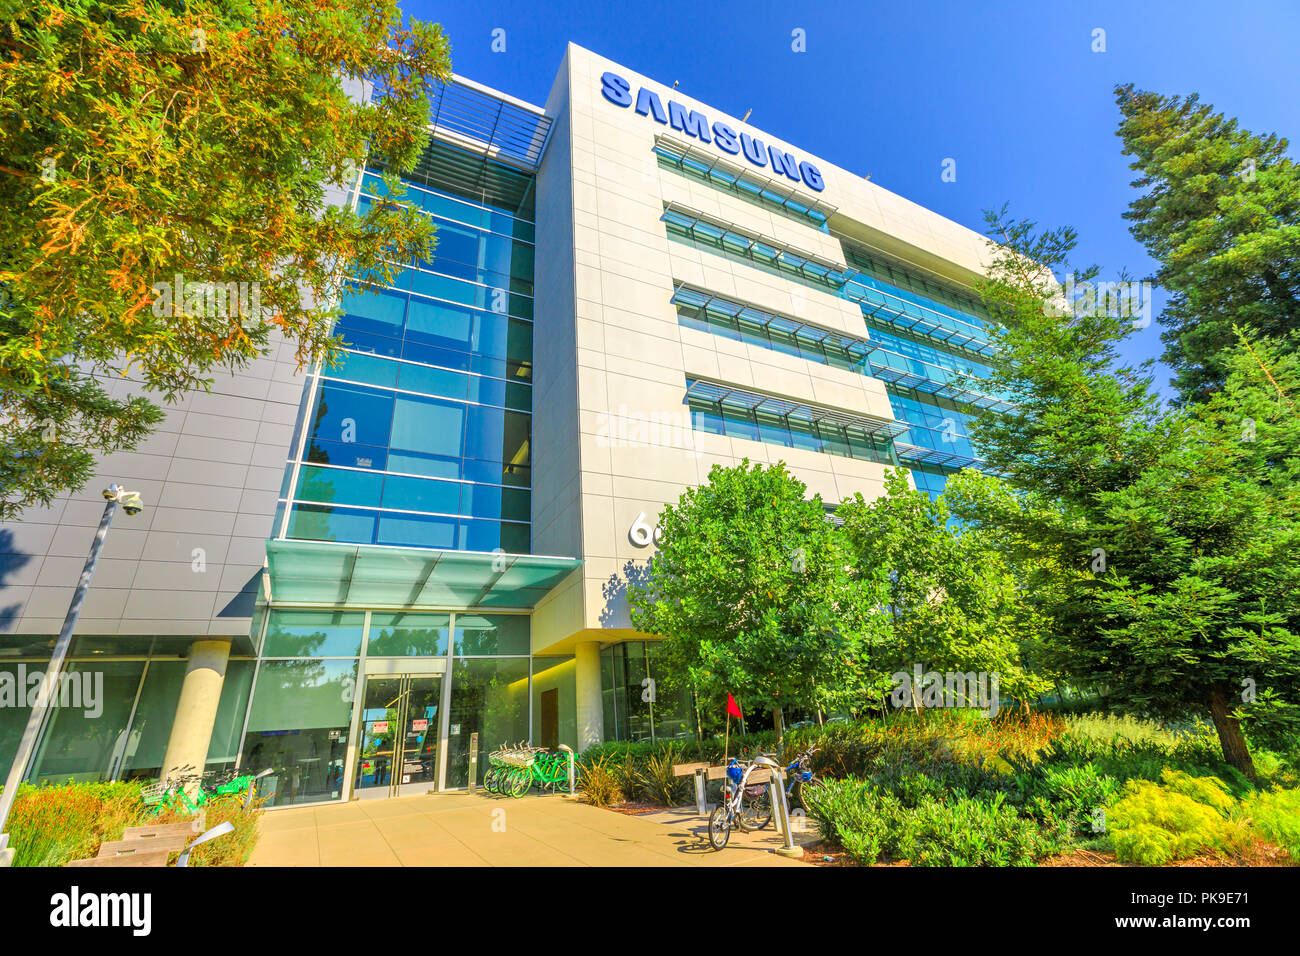 Mountain View, United States - August 13, 2018: Samsung Research America building in Silicon Valley, California. SRA is a research and develop division for new technologies of Samsung. Stock Photo